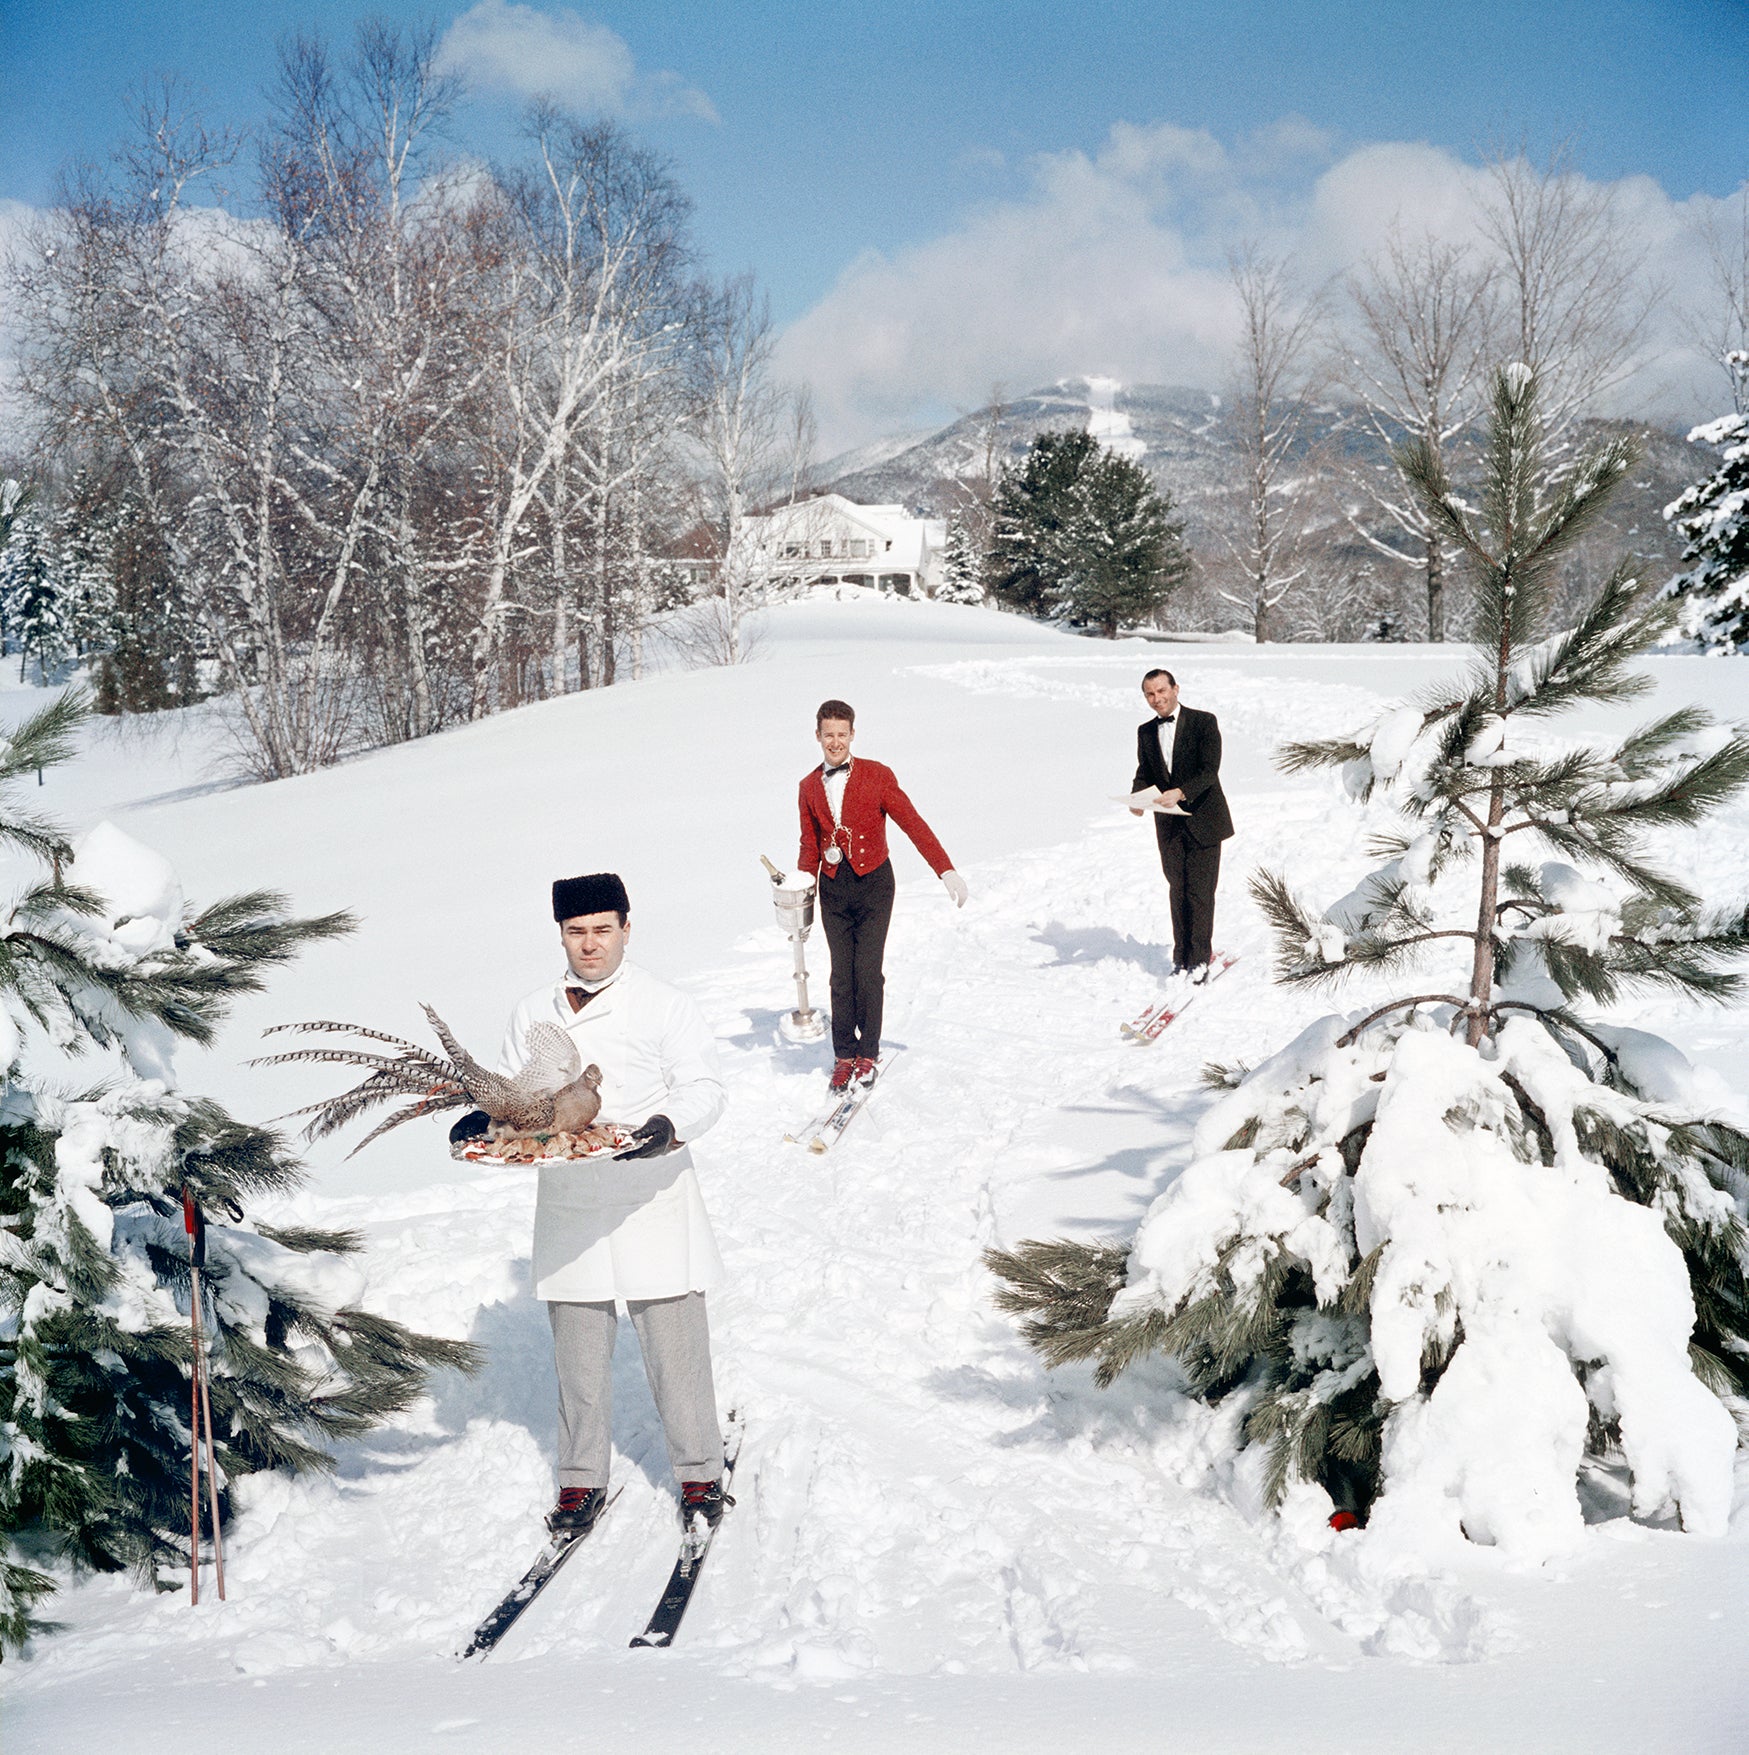 Slim Aarons: Skiing Waiters photo for sale Getty Images Gallery